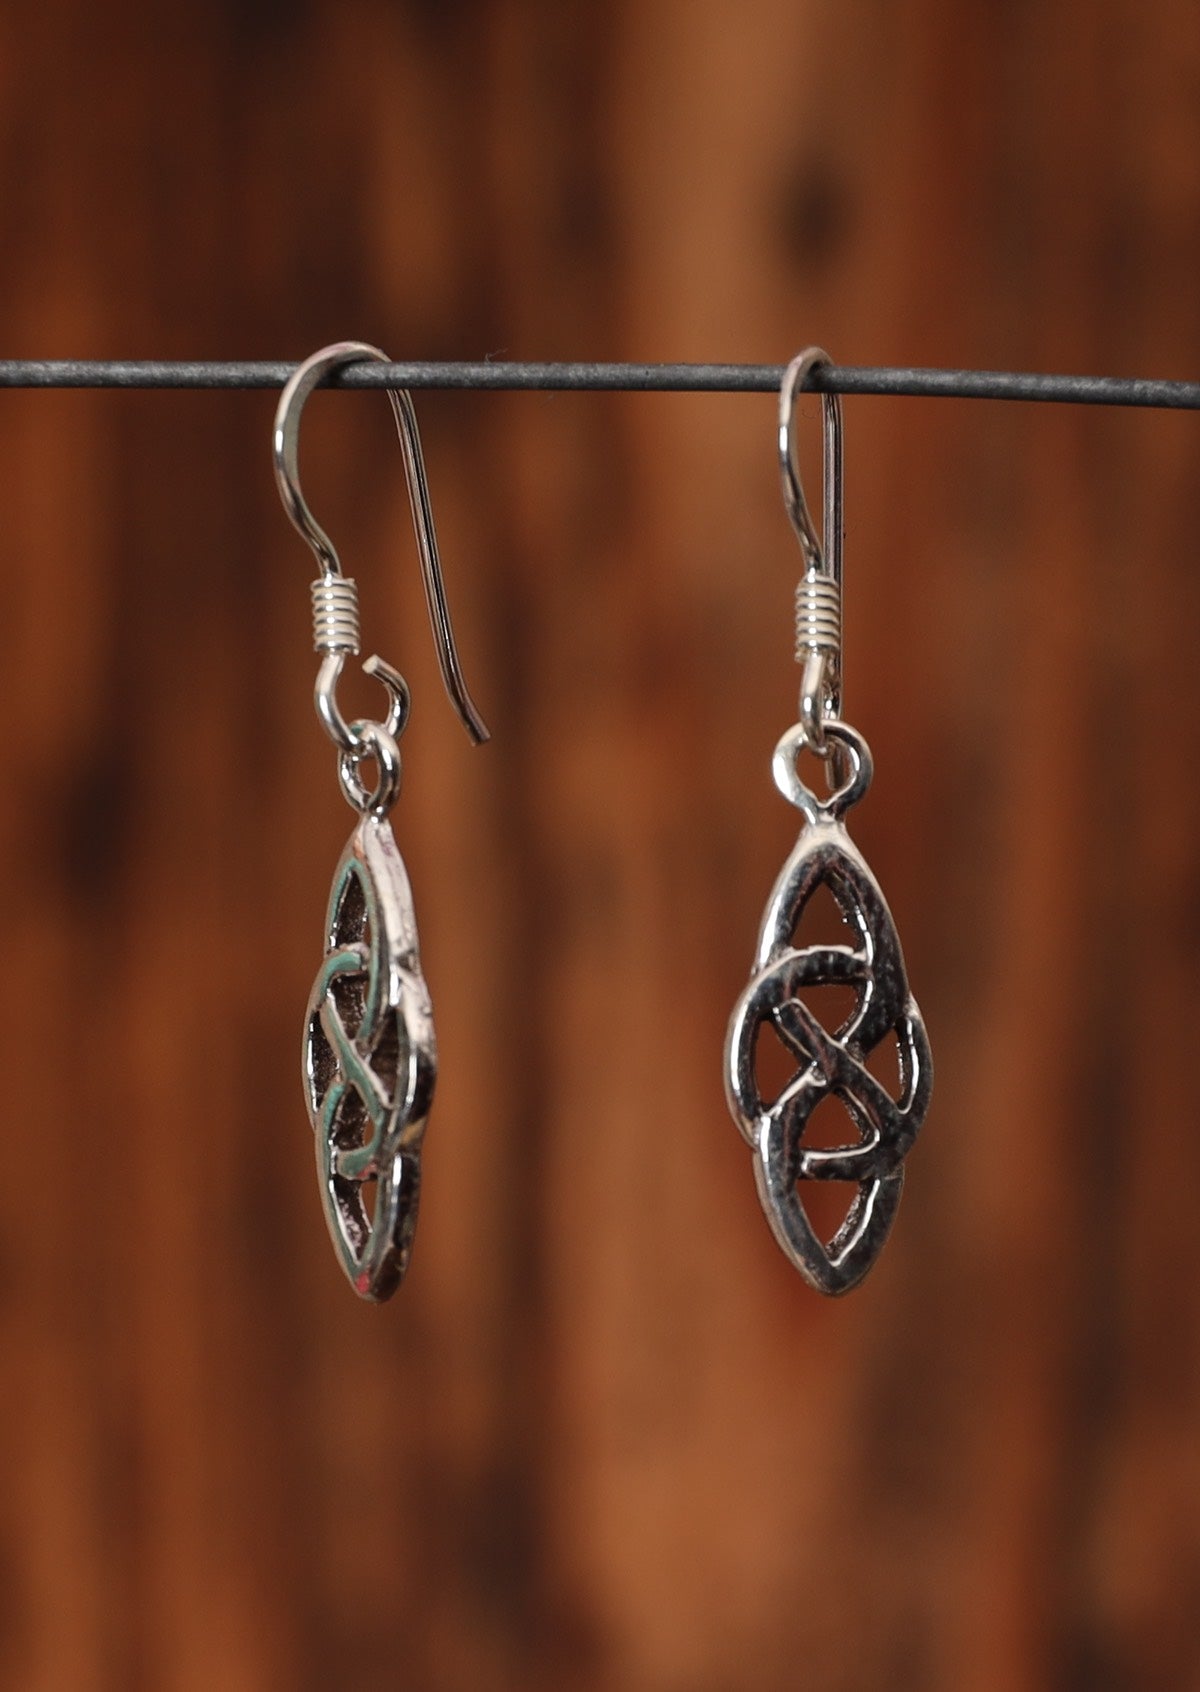 92.5% silver woven Celtic style earrings sitting on a wire for display.